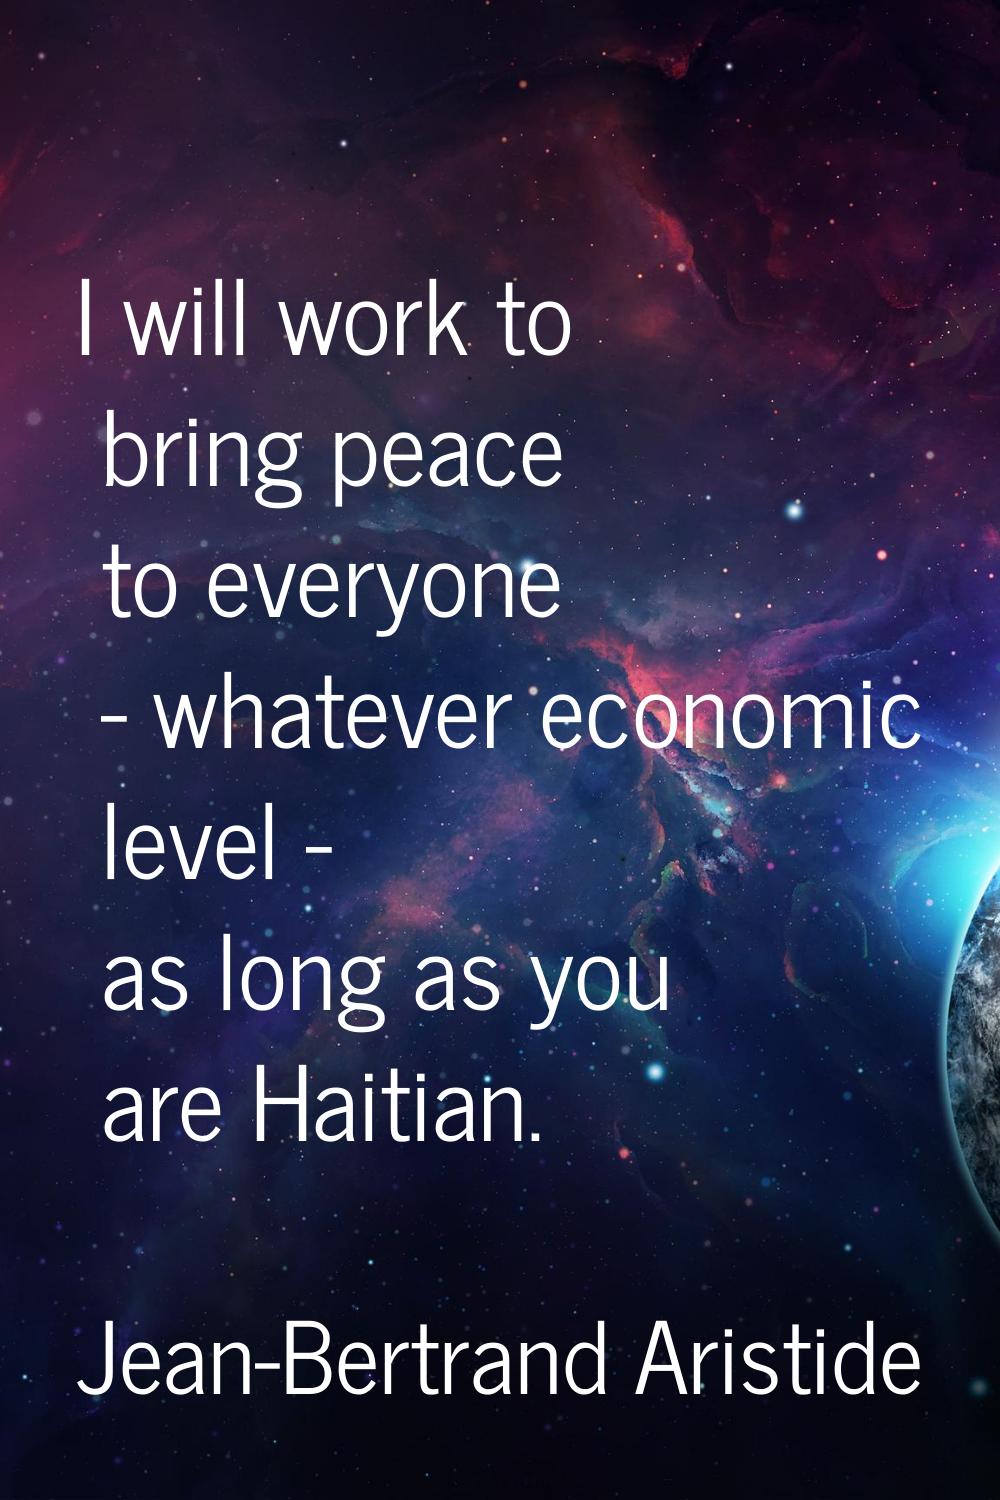 I will work to bring peace to everyone - whatever economic level - as long as you are Haitian.